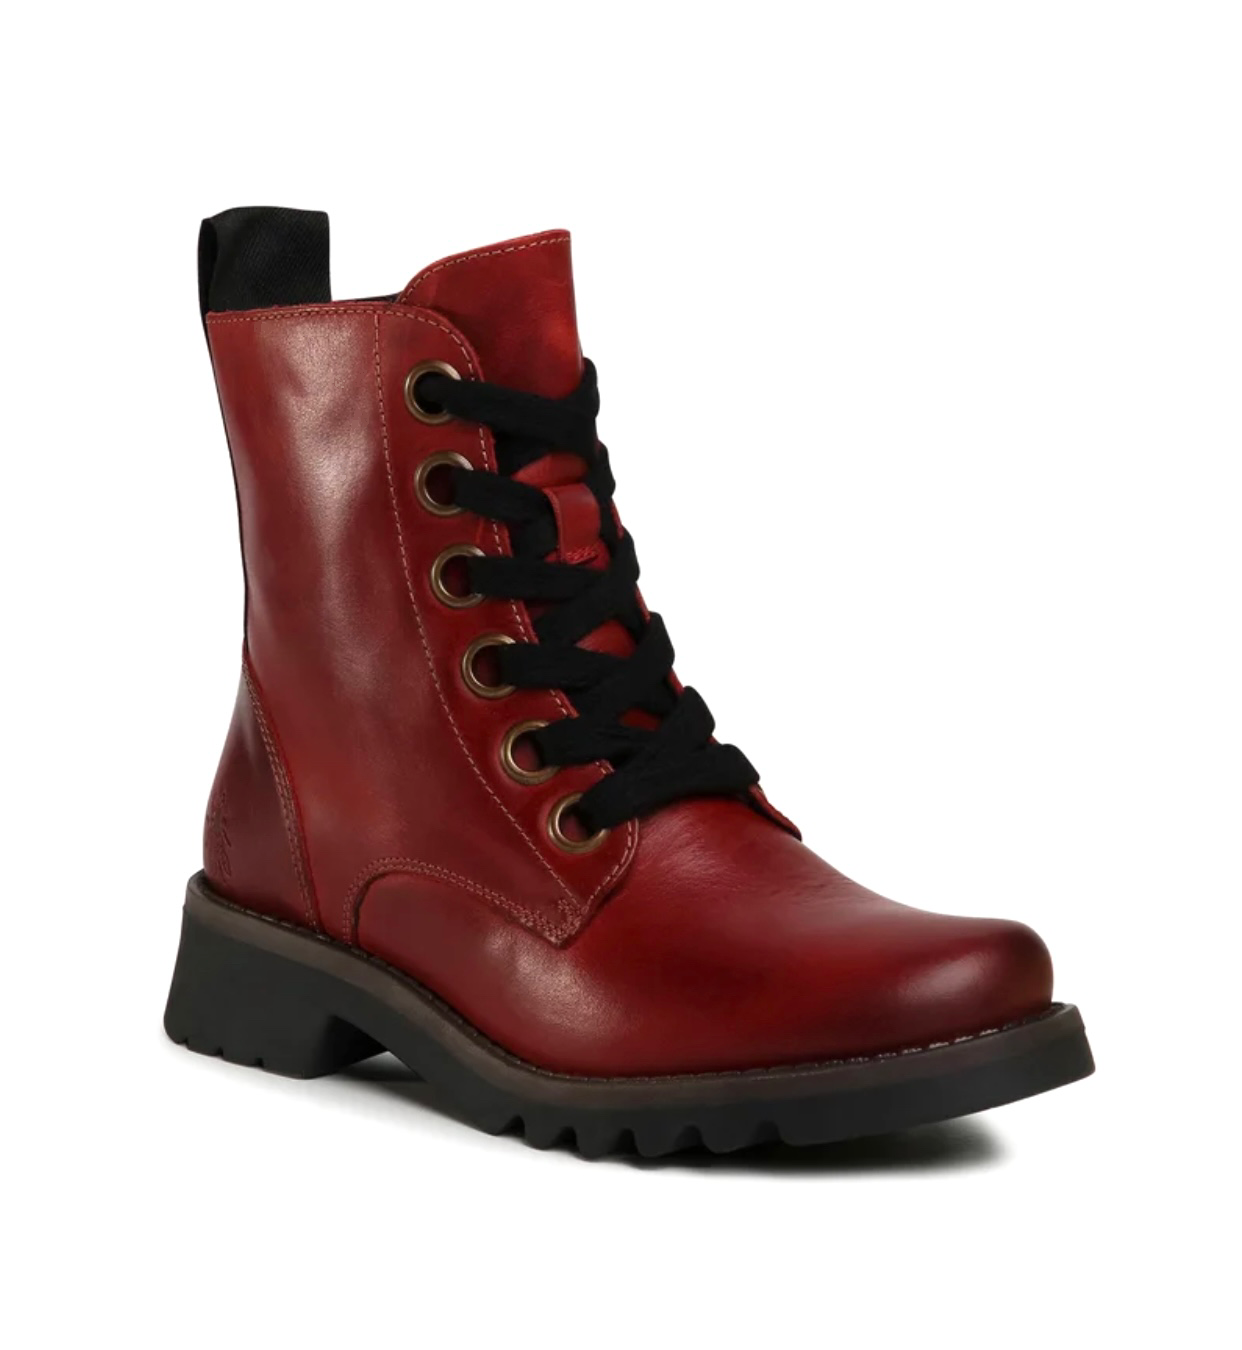 Fly London Ragi539Fly Rug Red 6 Eyelet Ankle Boot Made In Portugal